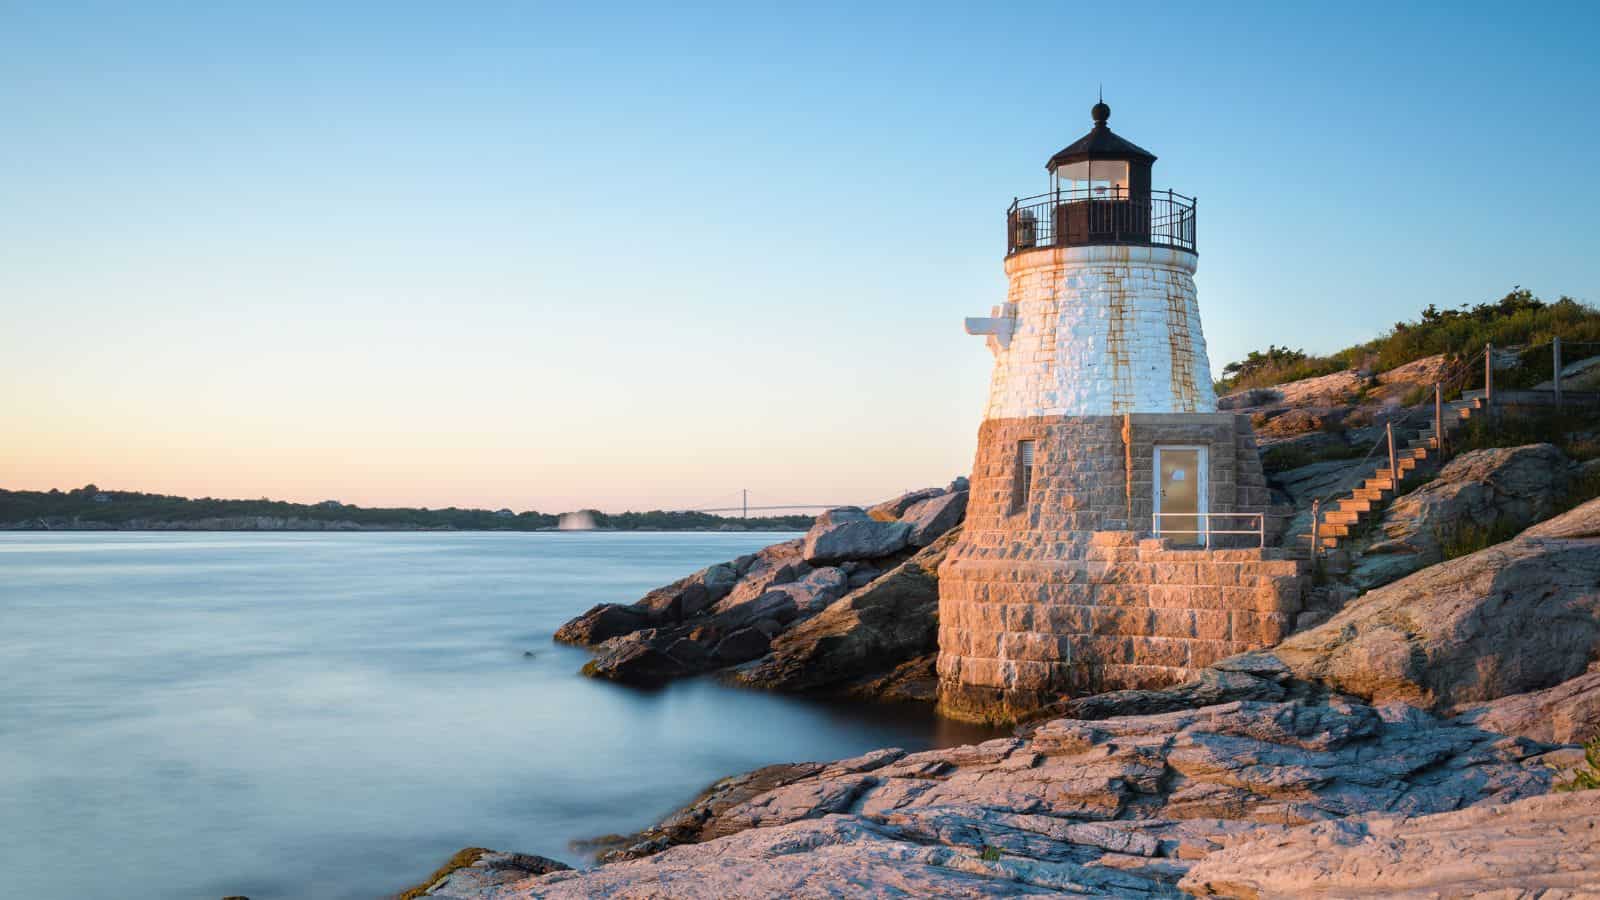 <p>Every summer, tourists from around the country flock to New England for its quaint small towns. From Newport to Nantucket, these villages boast everything from mountainous backdrops for hiking and relaxation to stunning shorelines complete with vibrant boardwalks and colonial houses.</p> <p><strong>These are the small towns in New England actually worth visiting this summer:</strong></p>